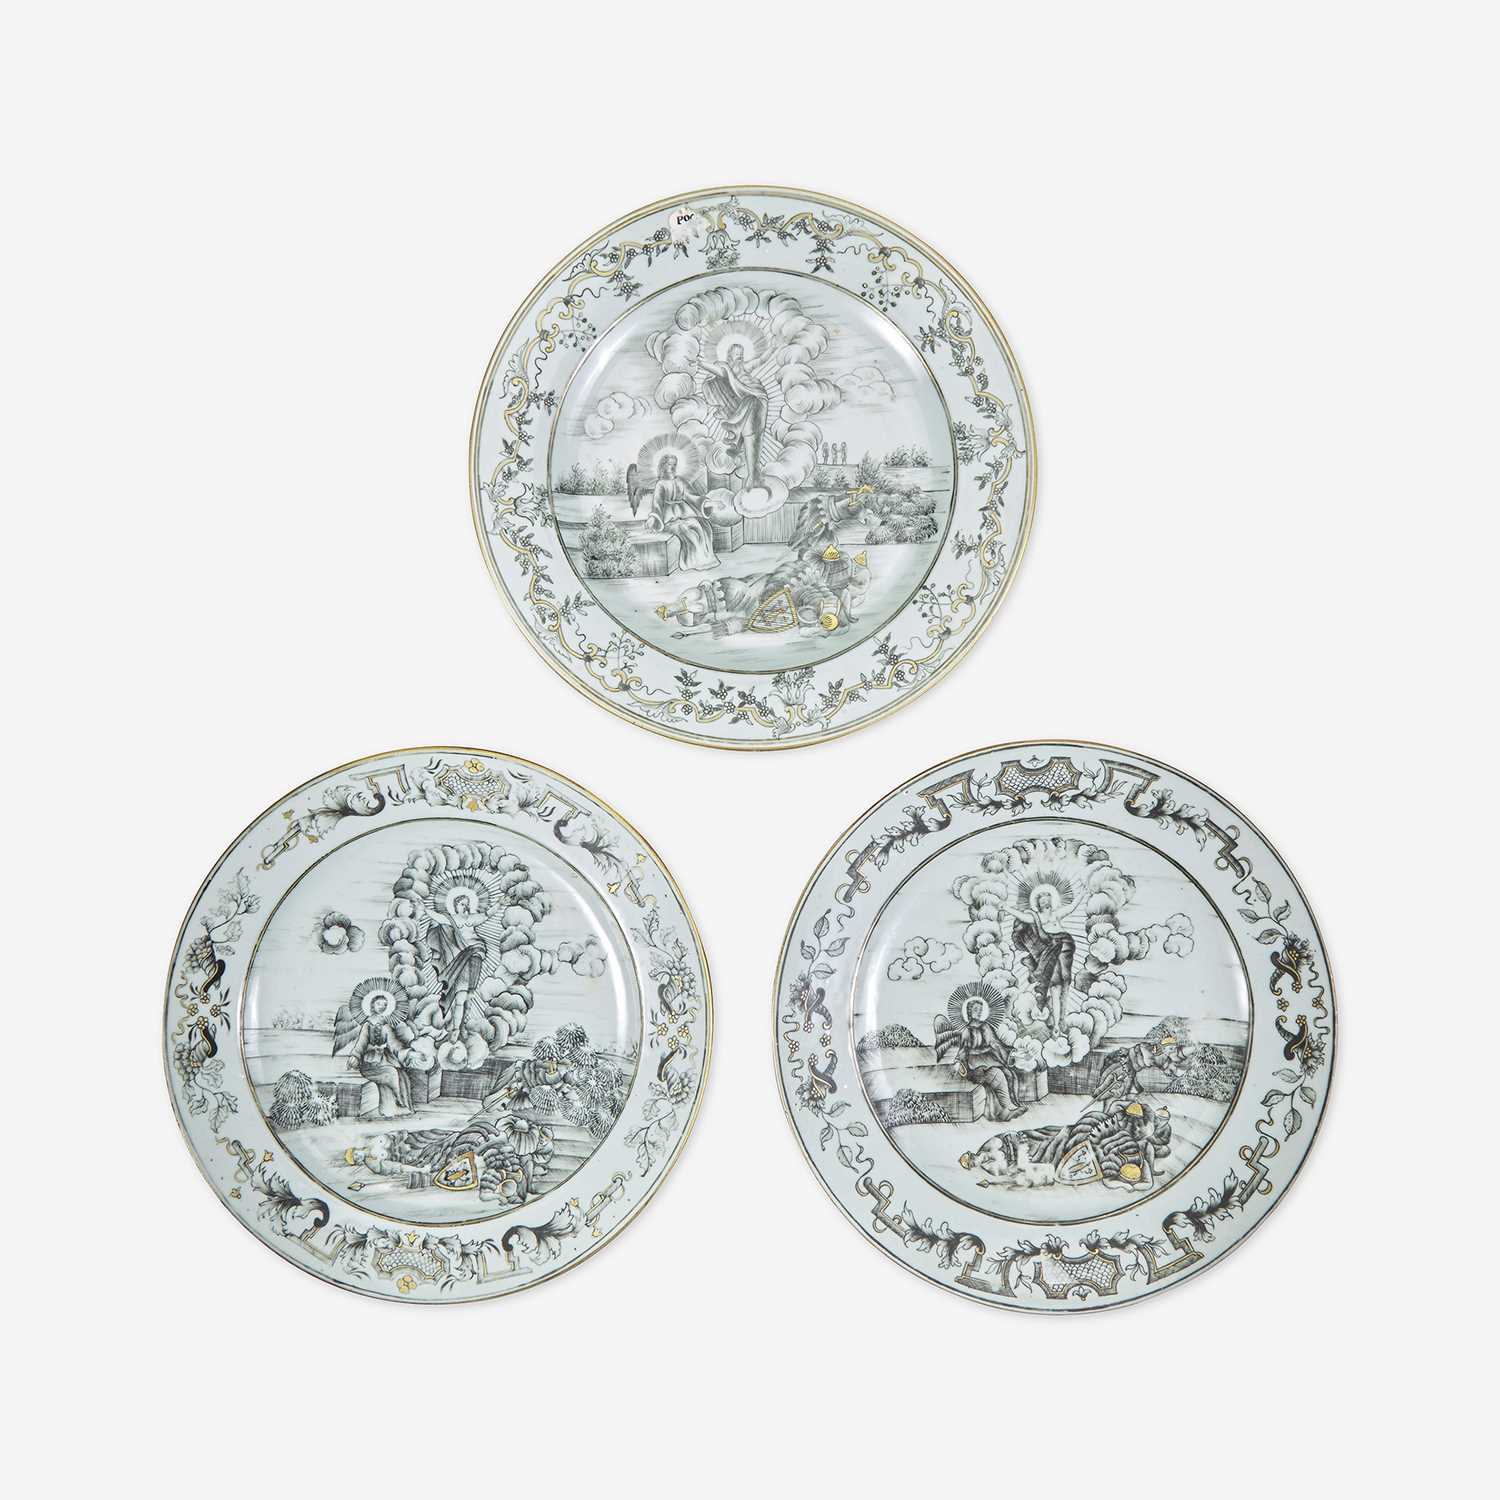 Lot 115 - Three Chinese Export Porcelain Grisaille and Gilt Decorated Plates